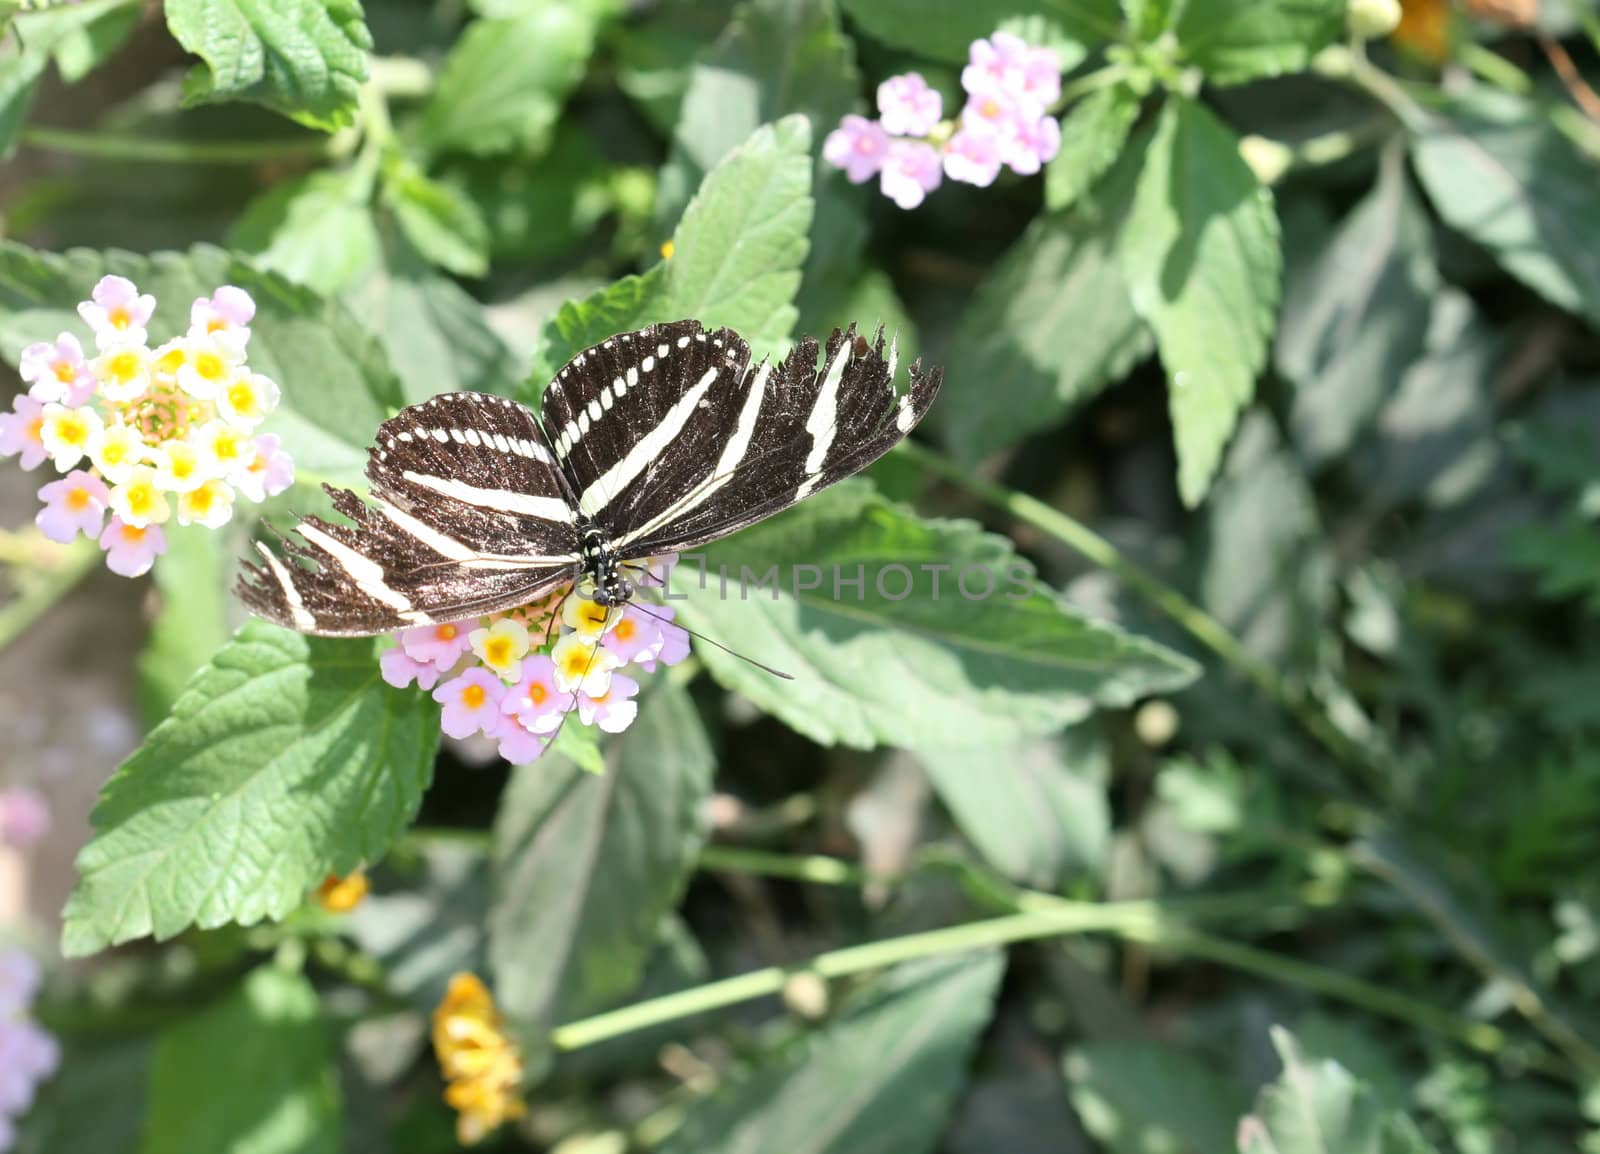 Zebra Longwing butterfly sitting on flowers. (Heliconius Charitonius)